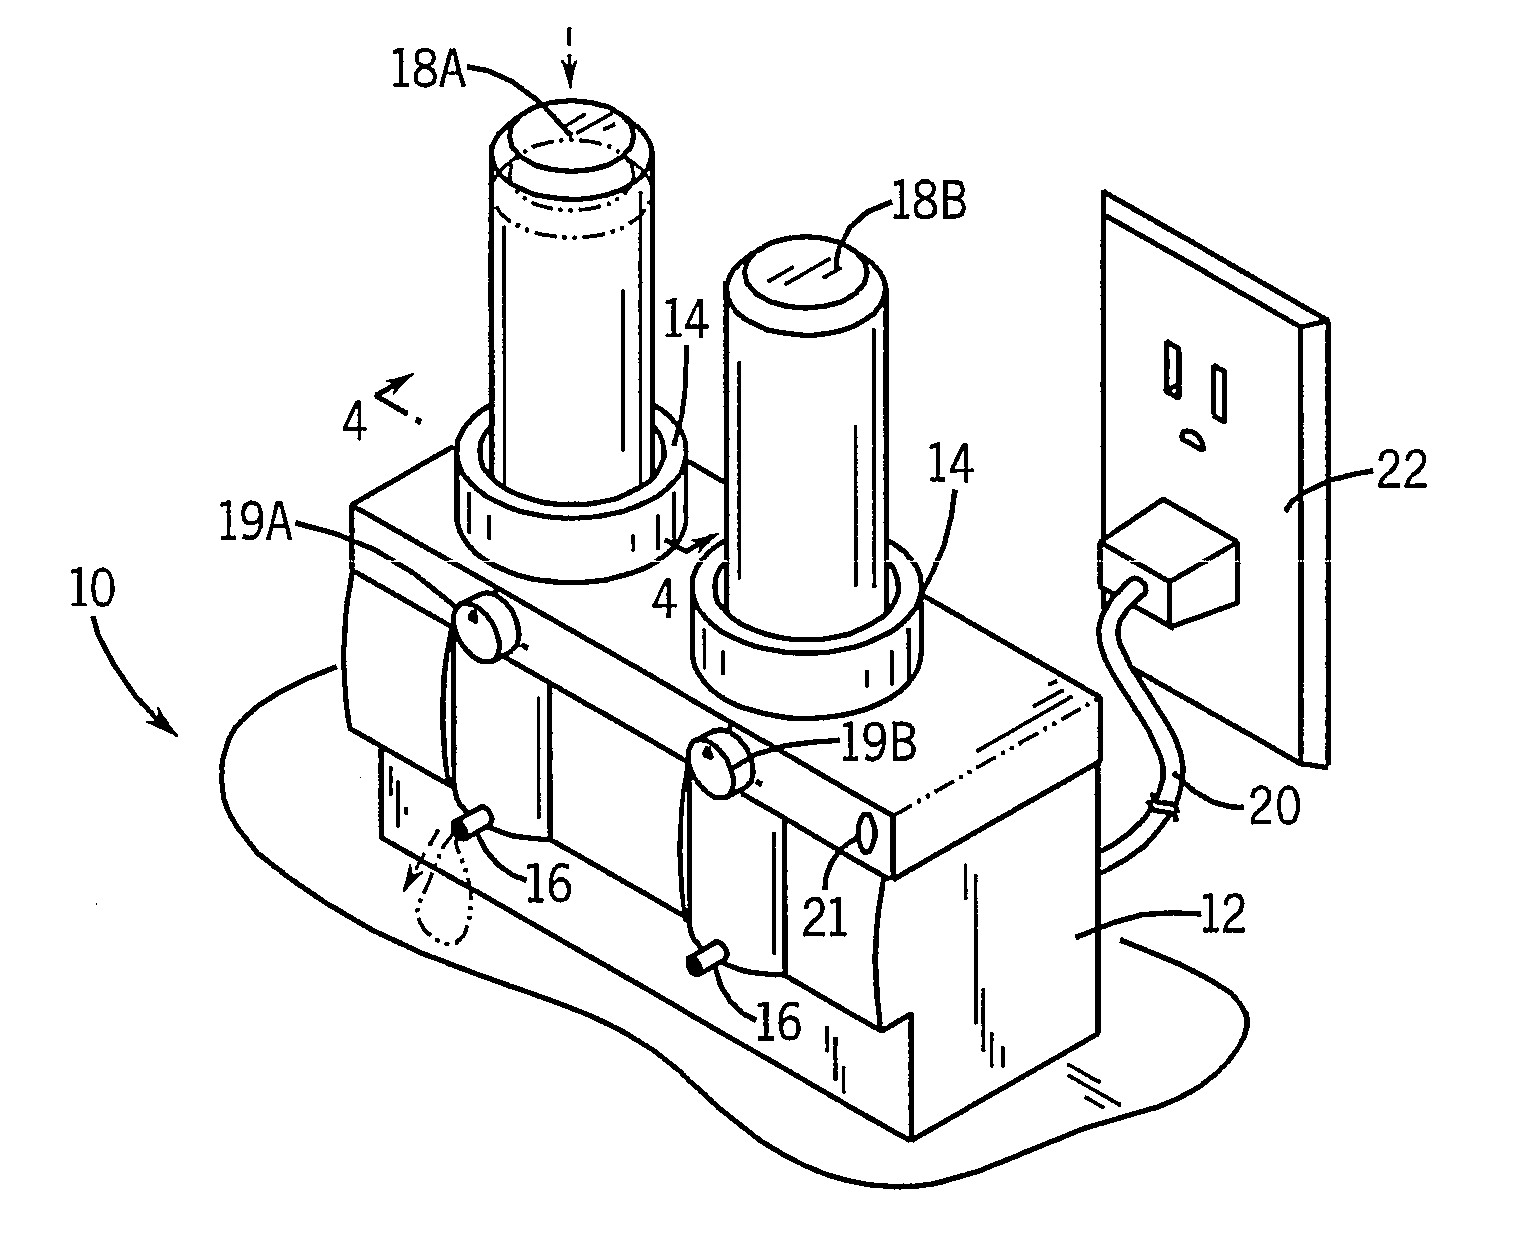 Dispensing device for heated flowable product